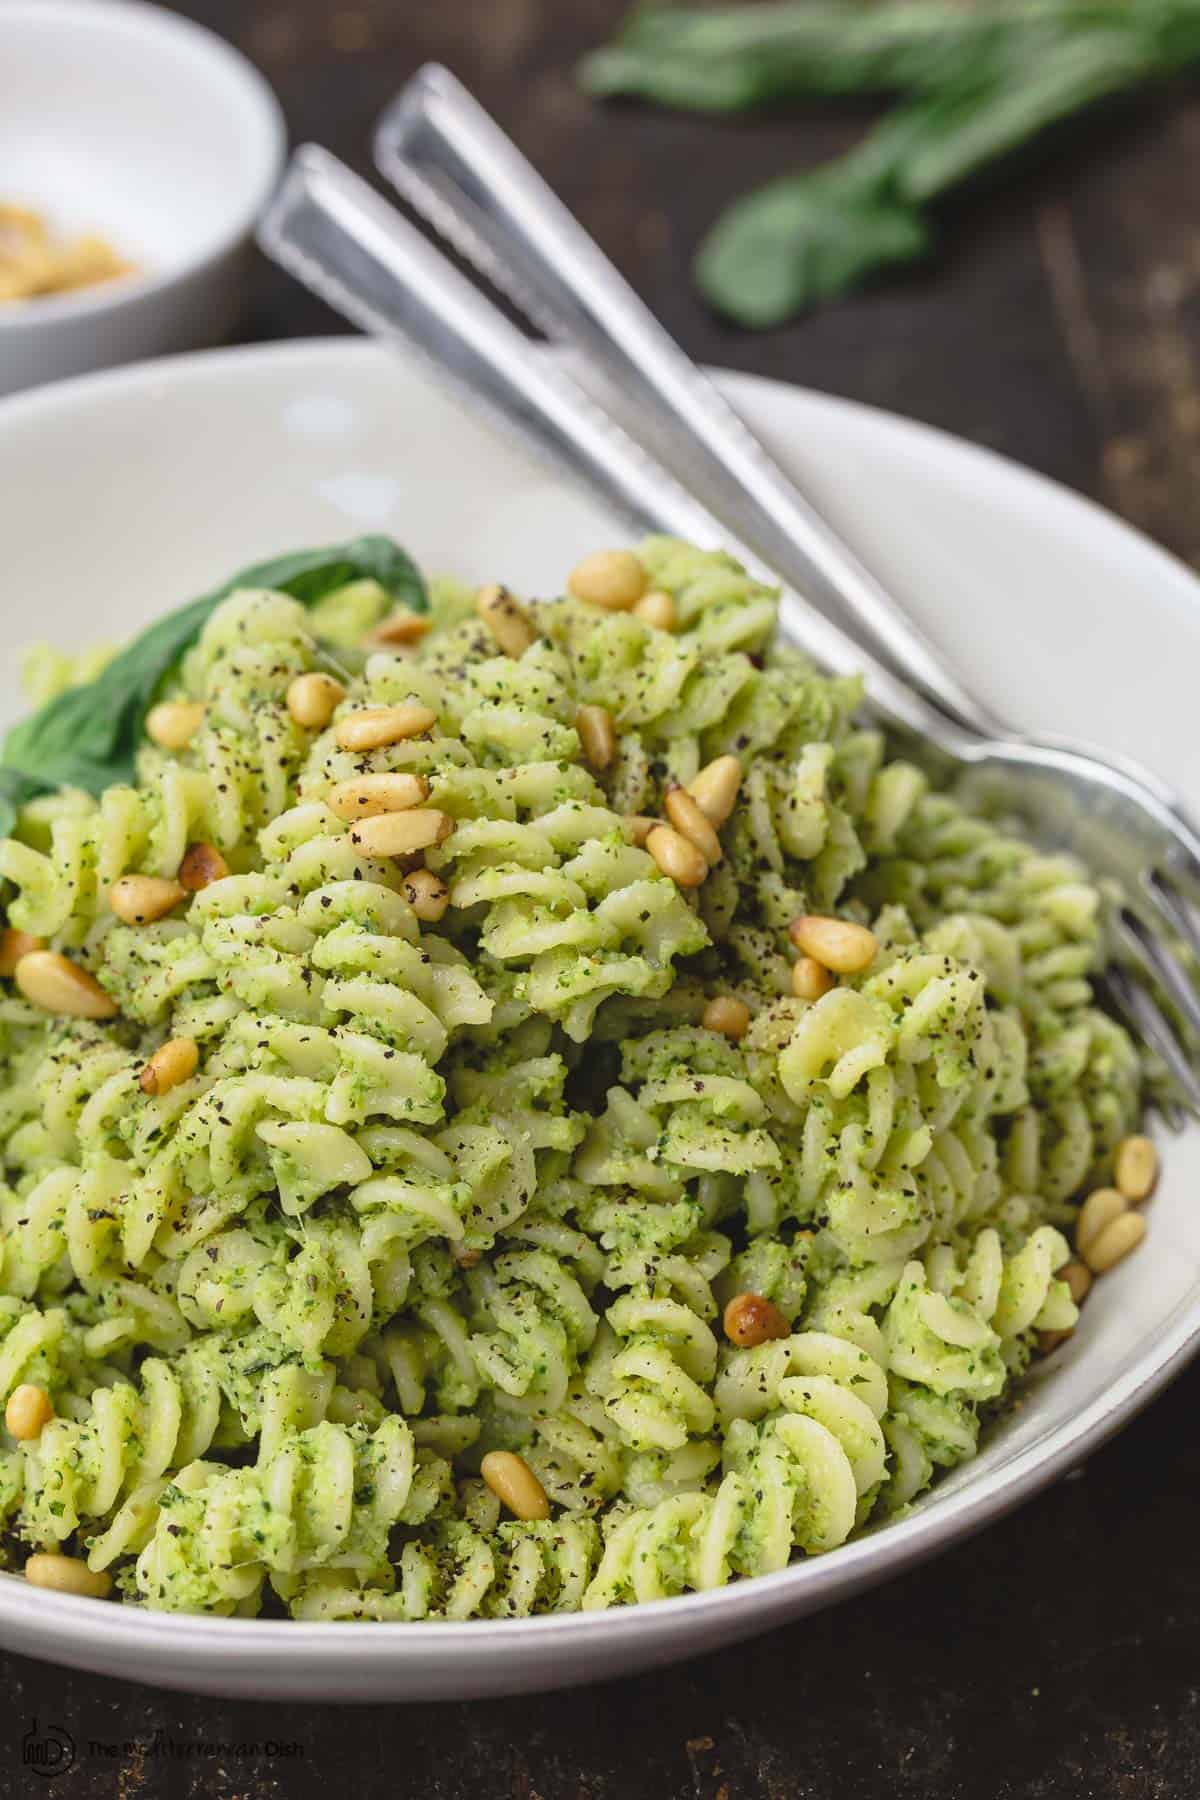 lemon broccoli pesto pasta served in dinner bowl. A side of pine nuts and fresh basil